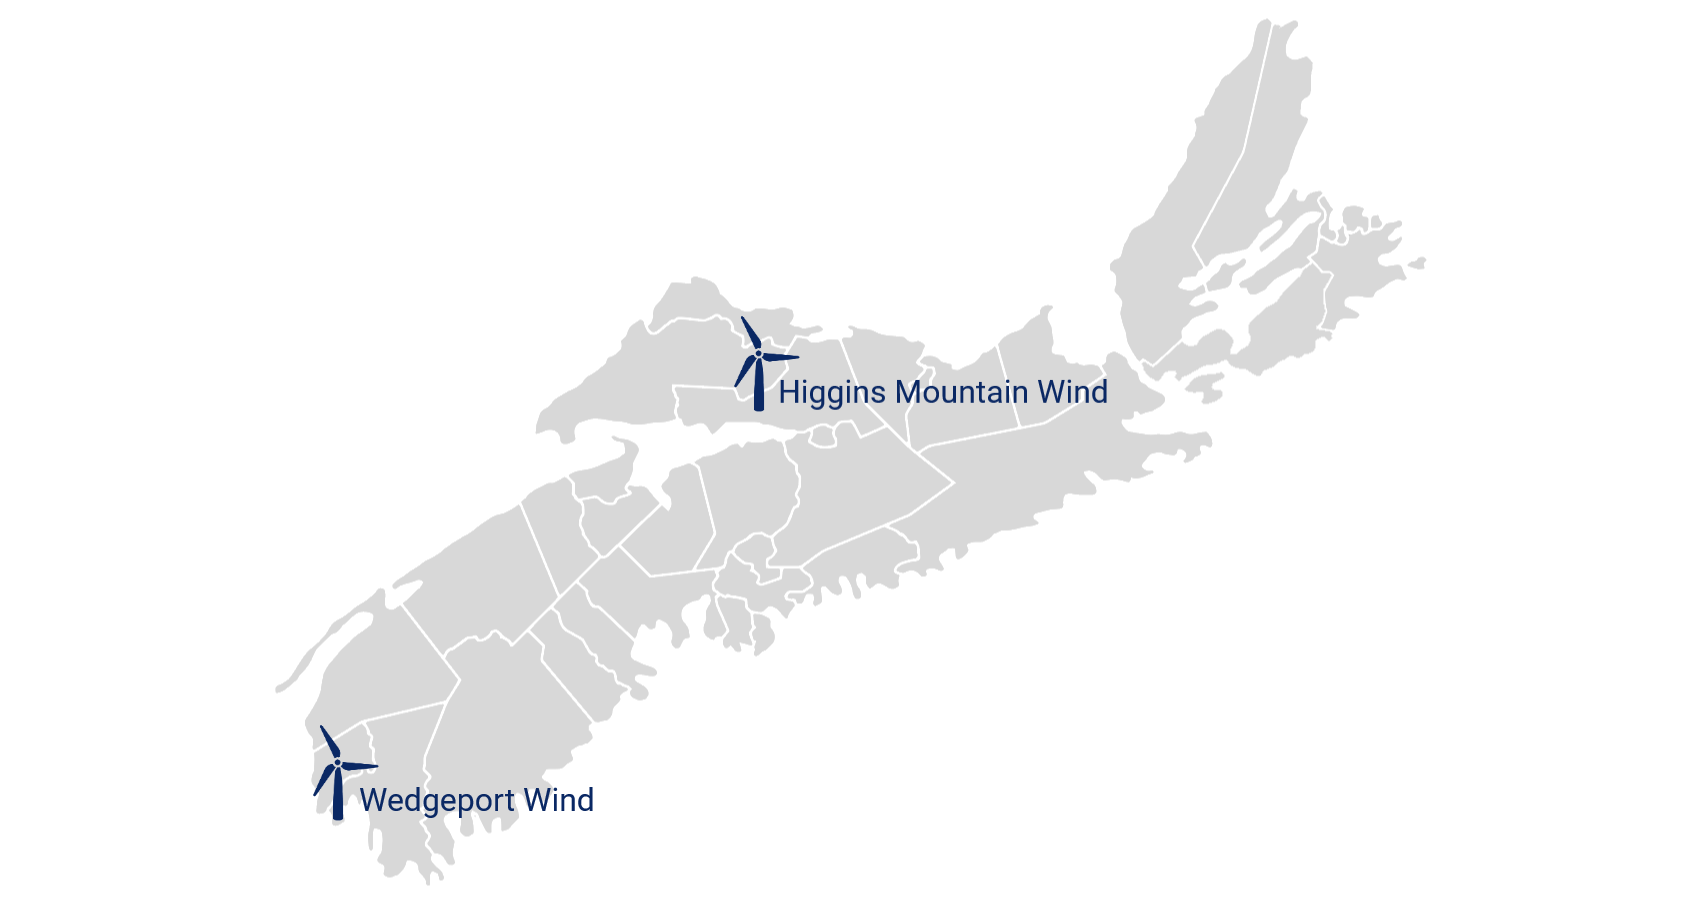 Elemental Energy and Partners Awarded Two Wind Energy Projects in Nova Scotia